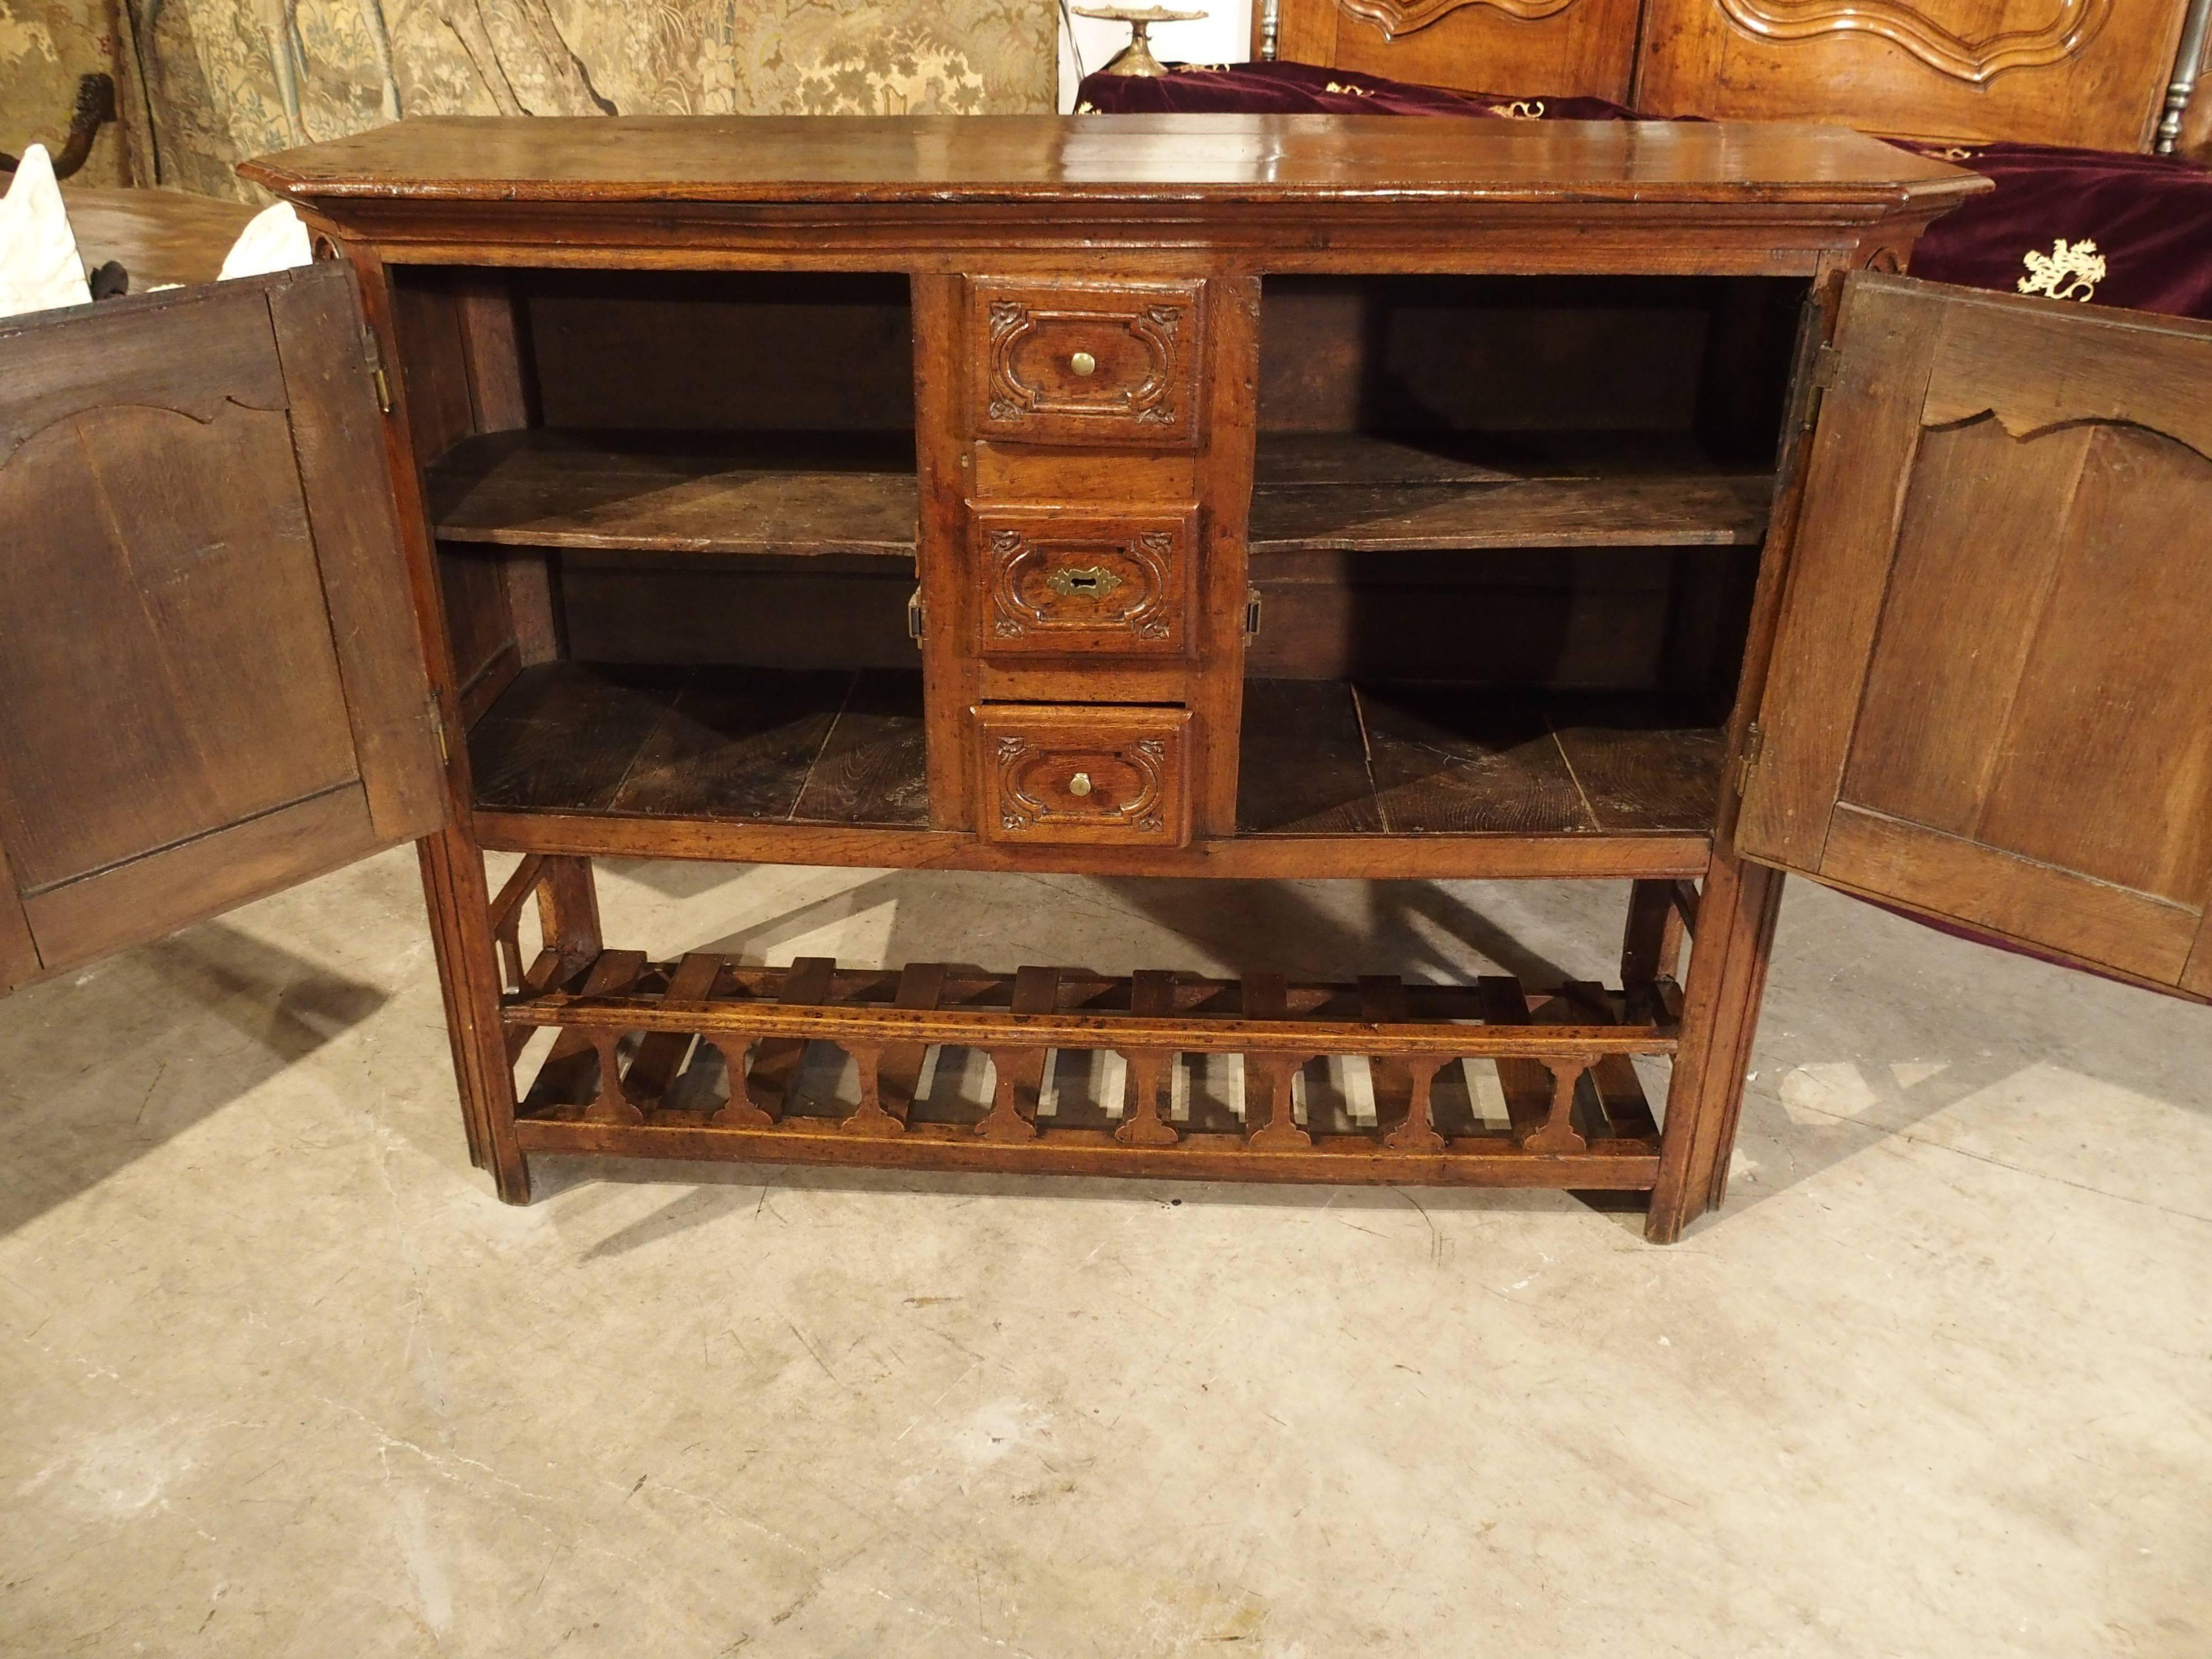 Oak Antique Country French Kitchen Buffet from the Early 1800s